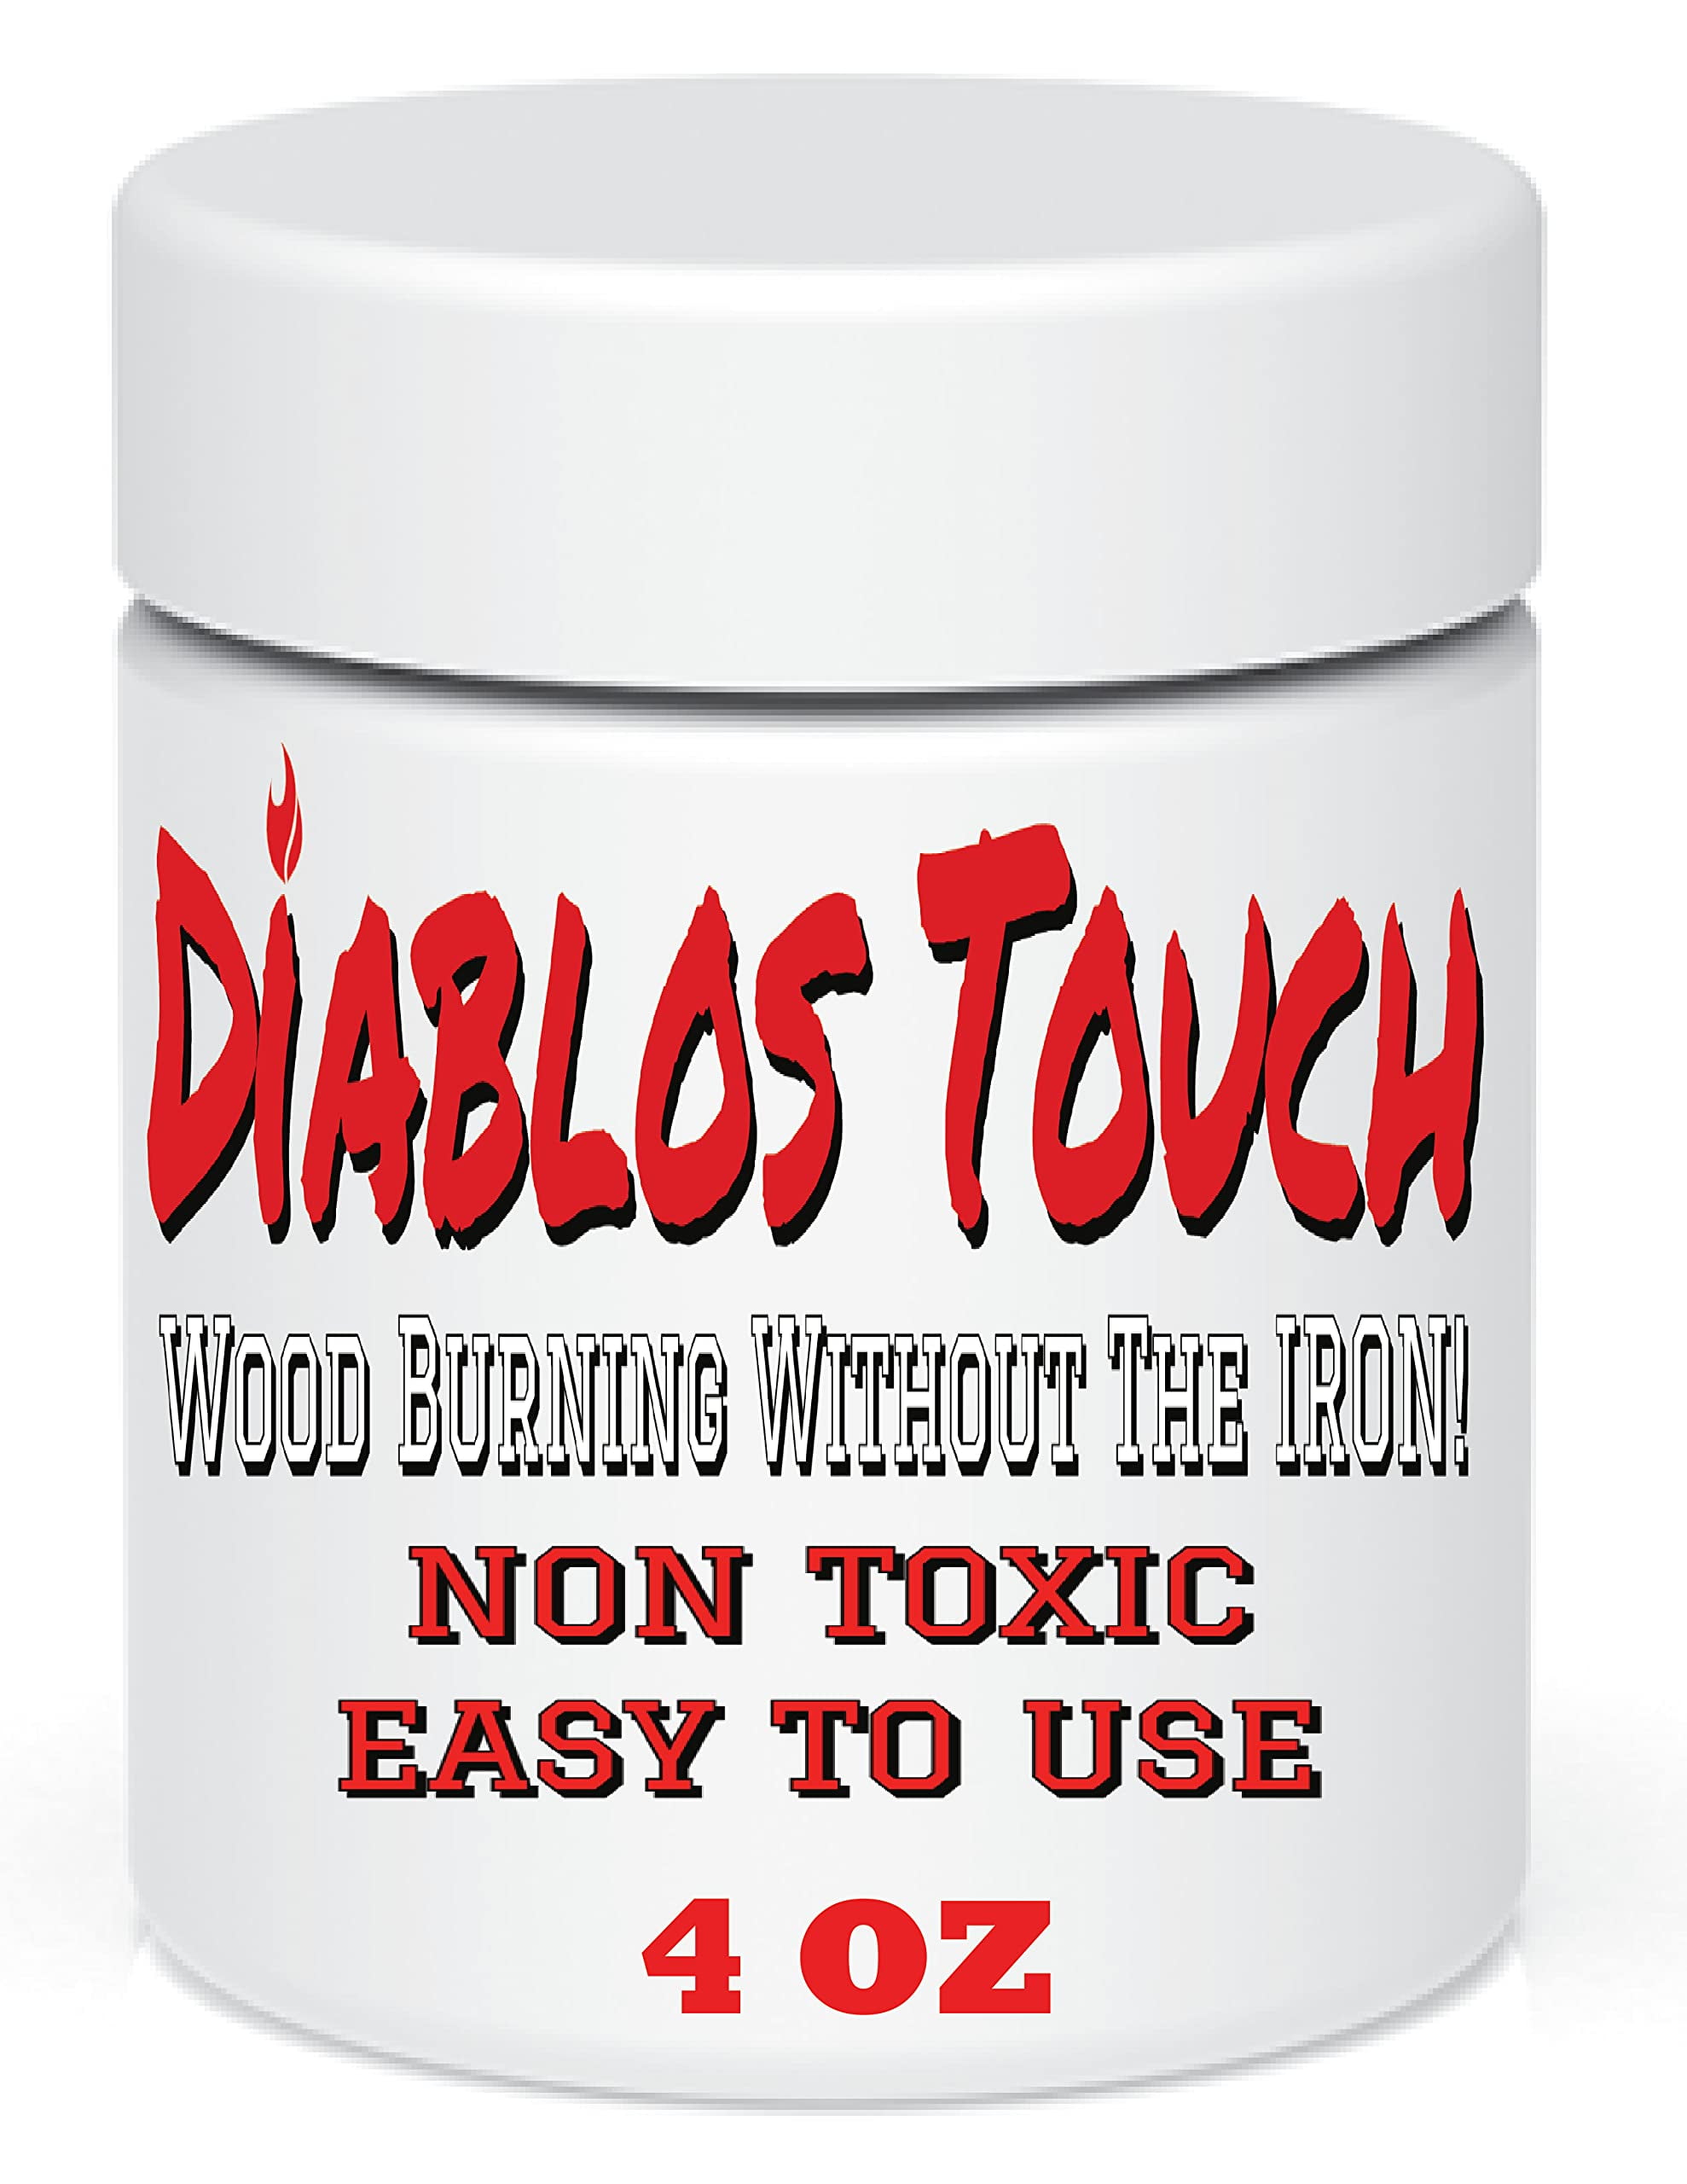 Diablos Touch - Wood Burning Gel for Crafting Drawing DIY Projects and  More. 4 OZ Gel Jar Easy to use No Need for HOT Irons This Works with Most  Woods